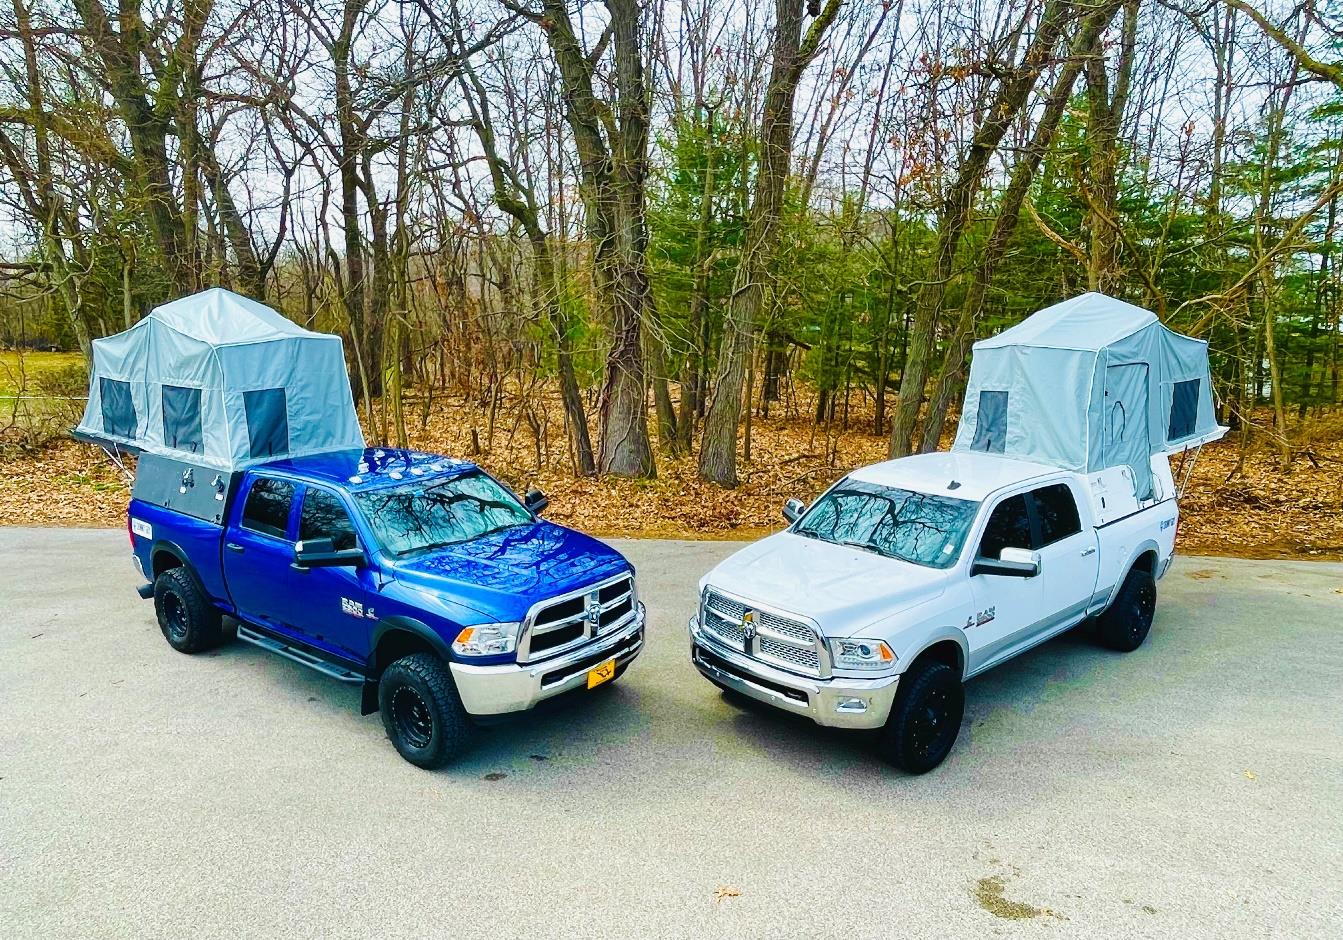 Two pickup trucks, outfitted for overland adventures, are parked next to each other in a forested area. Each truck has a rooftop tent set up. The truck on the left is blue, while the one on the right is white. The background features trees with minimal foliage and a ground covered in dry leaves.